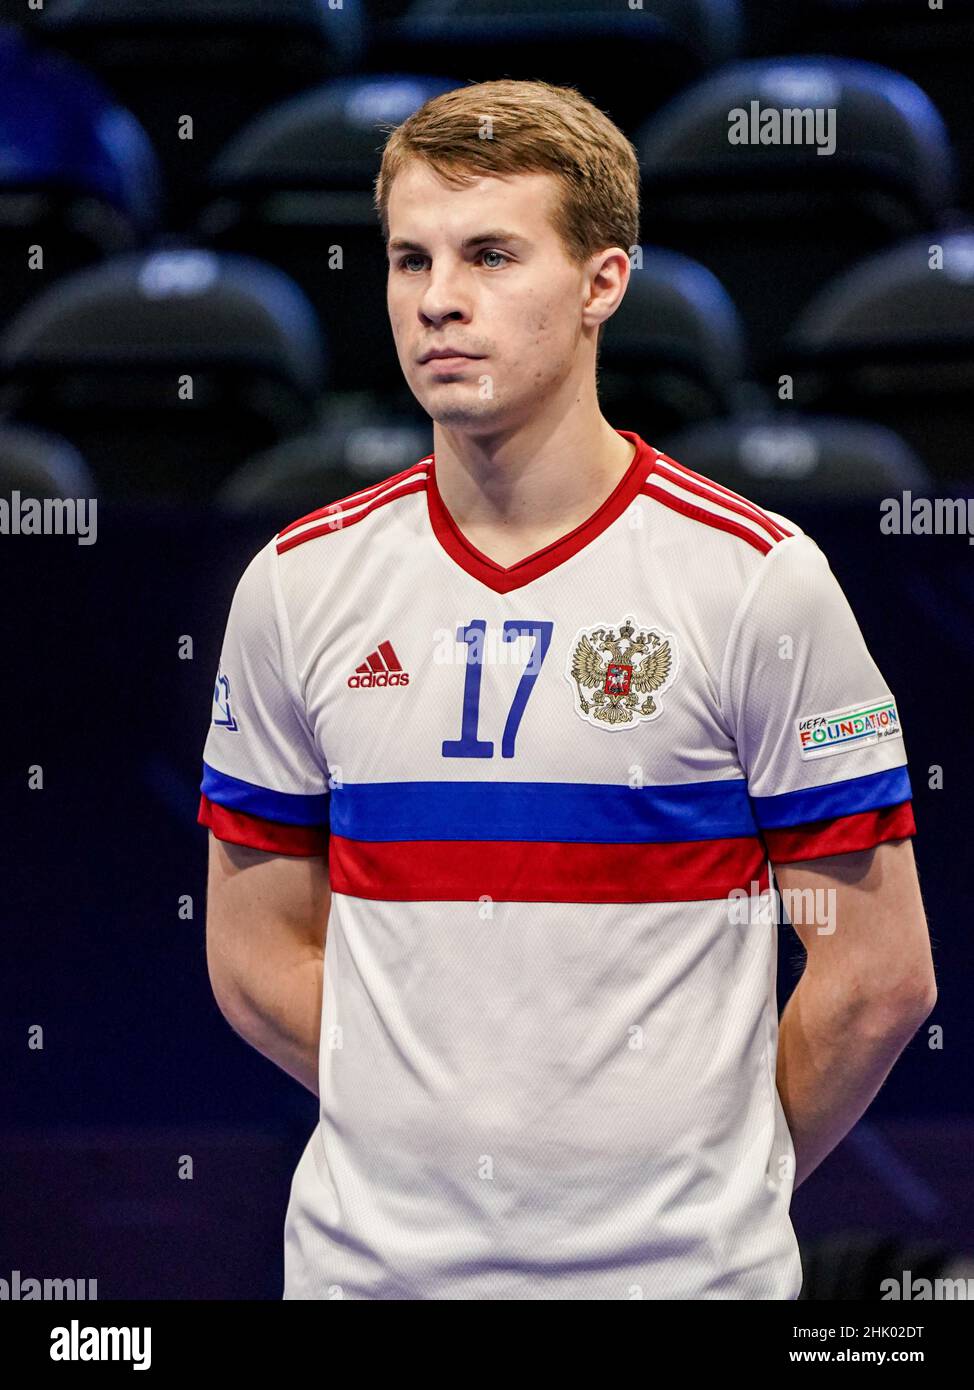 AMSTERDAM, NETHERLANDS - FEBRUARY 1: Anton Sokolov of Russia during the  Men's Futsal Euro 2022 Quarterfinals match between Russia and the Georgia  at the Ziggo Dome on February 1, 2022 in Amsterdam,